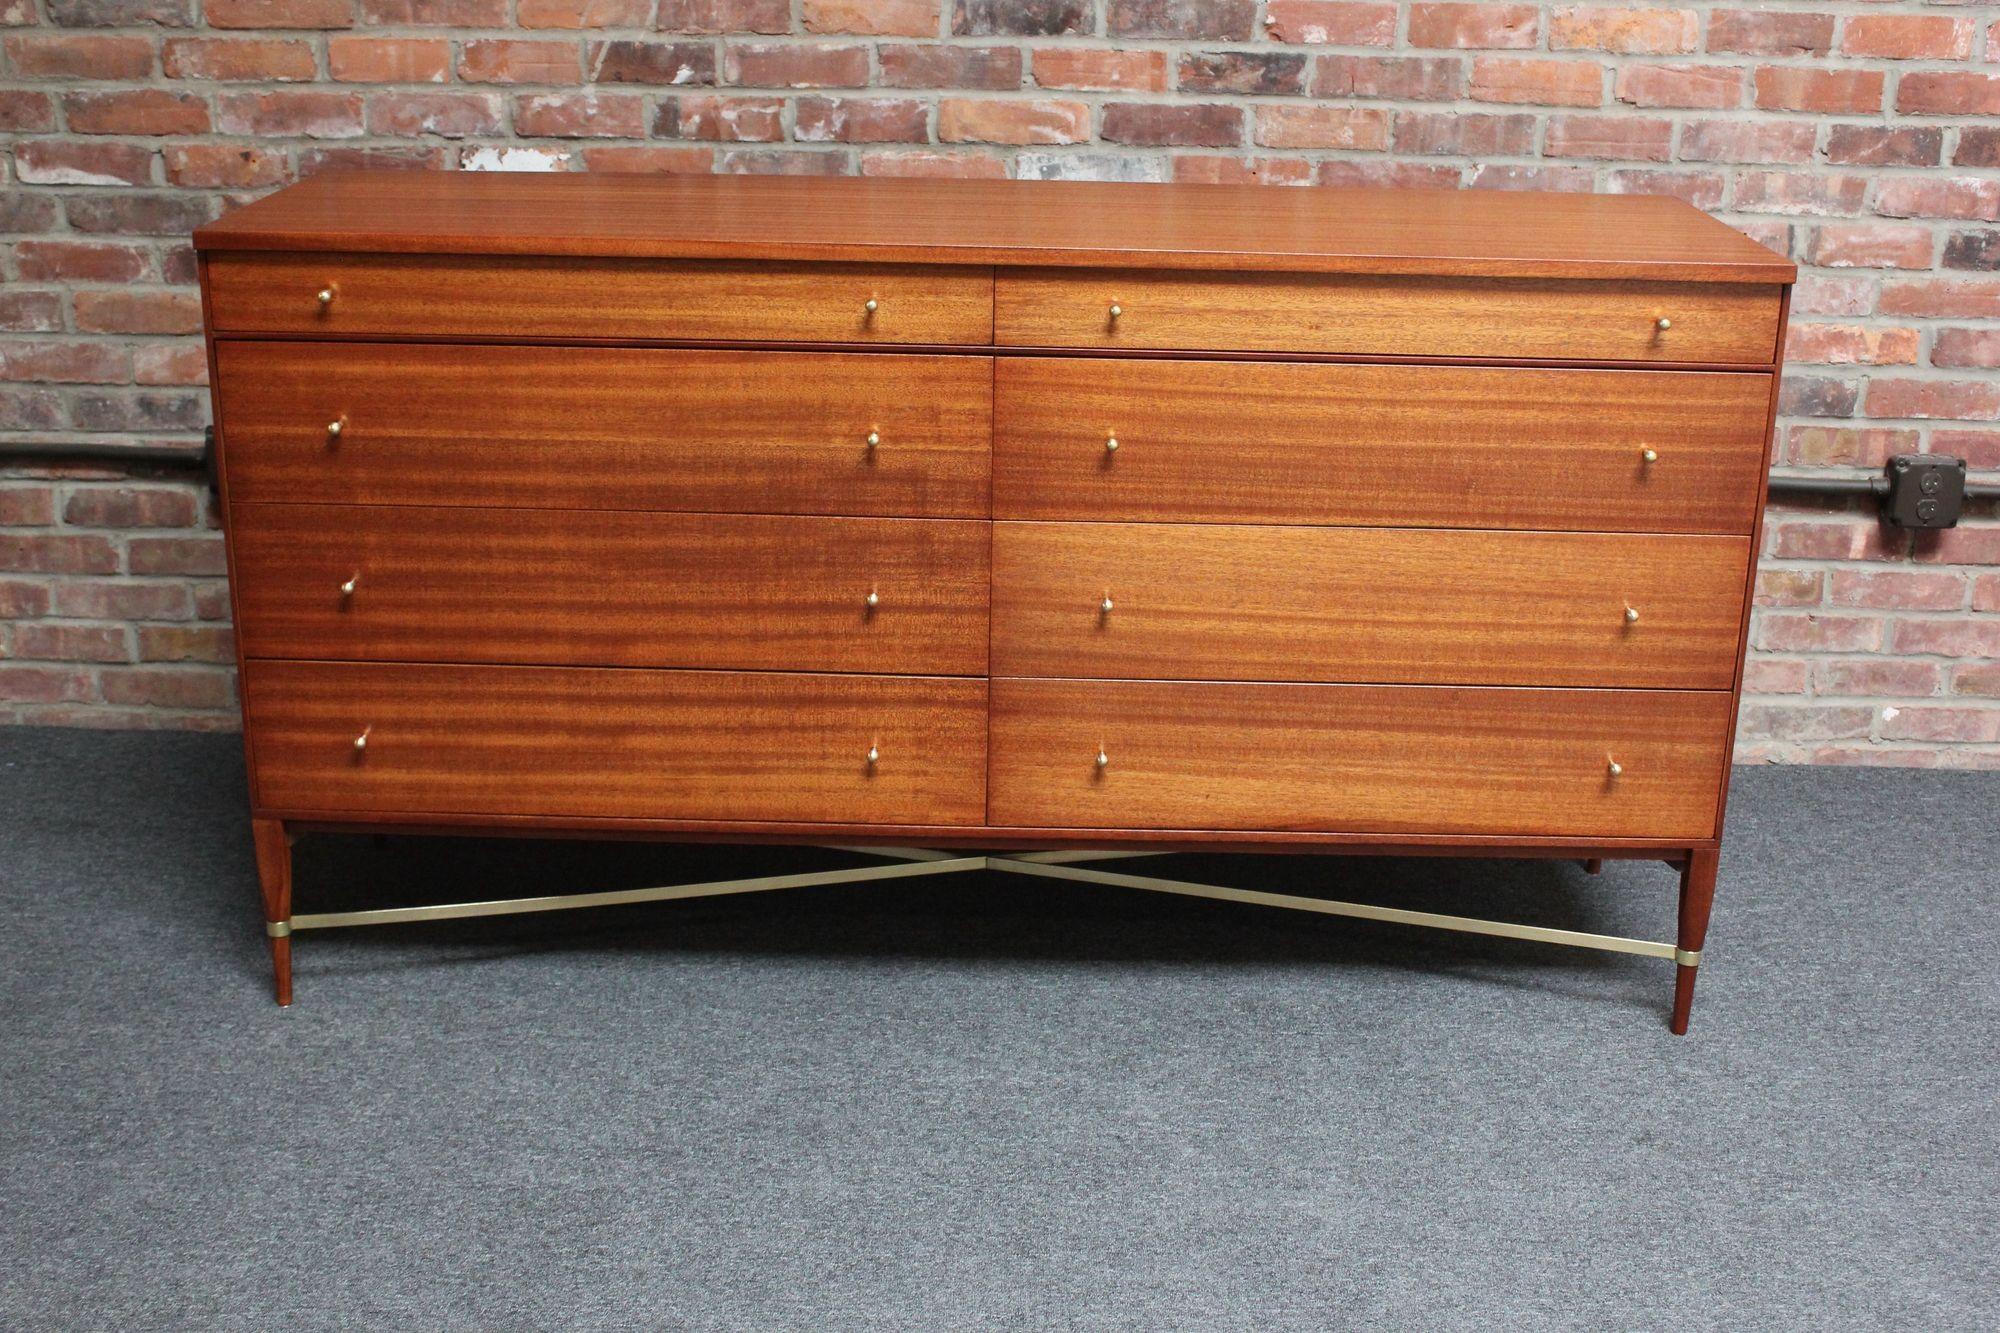 Paul Mccobb Calvin Group eight-drawer double dresser / lowboy cabinet manufactured by Directional Furniture (ca. early 1950s, USA).
Composed of a stained mahogany chest with brass tear-drop pulls supported by carved, tapered legs and brass 'x'